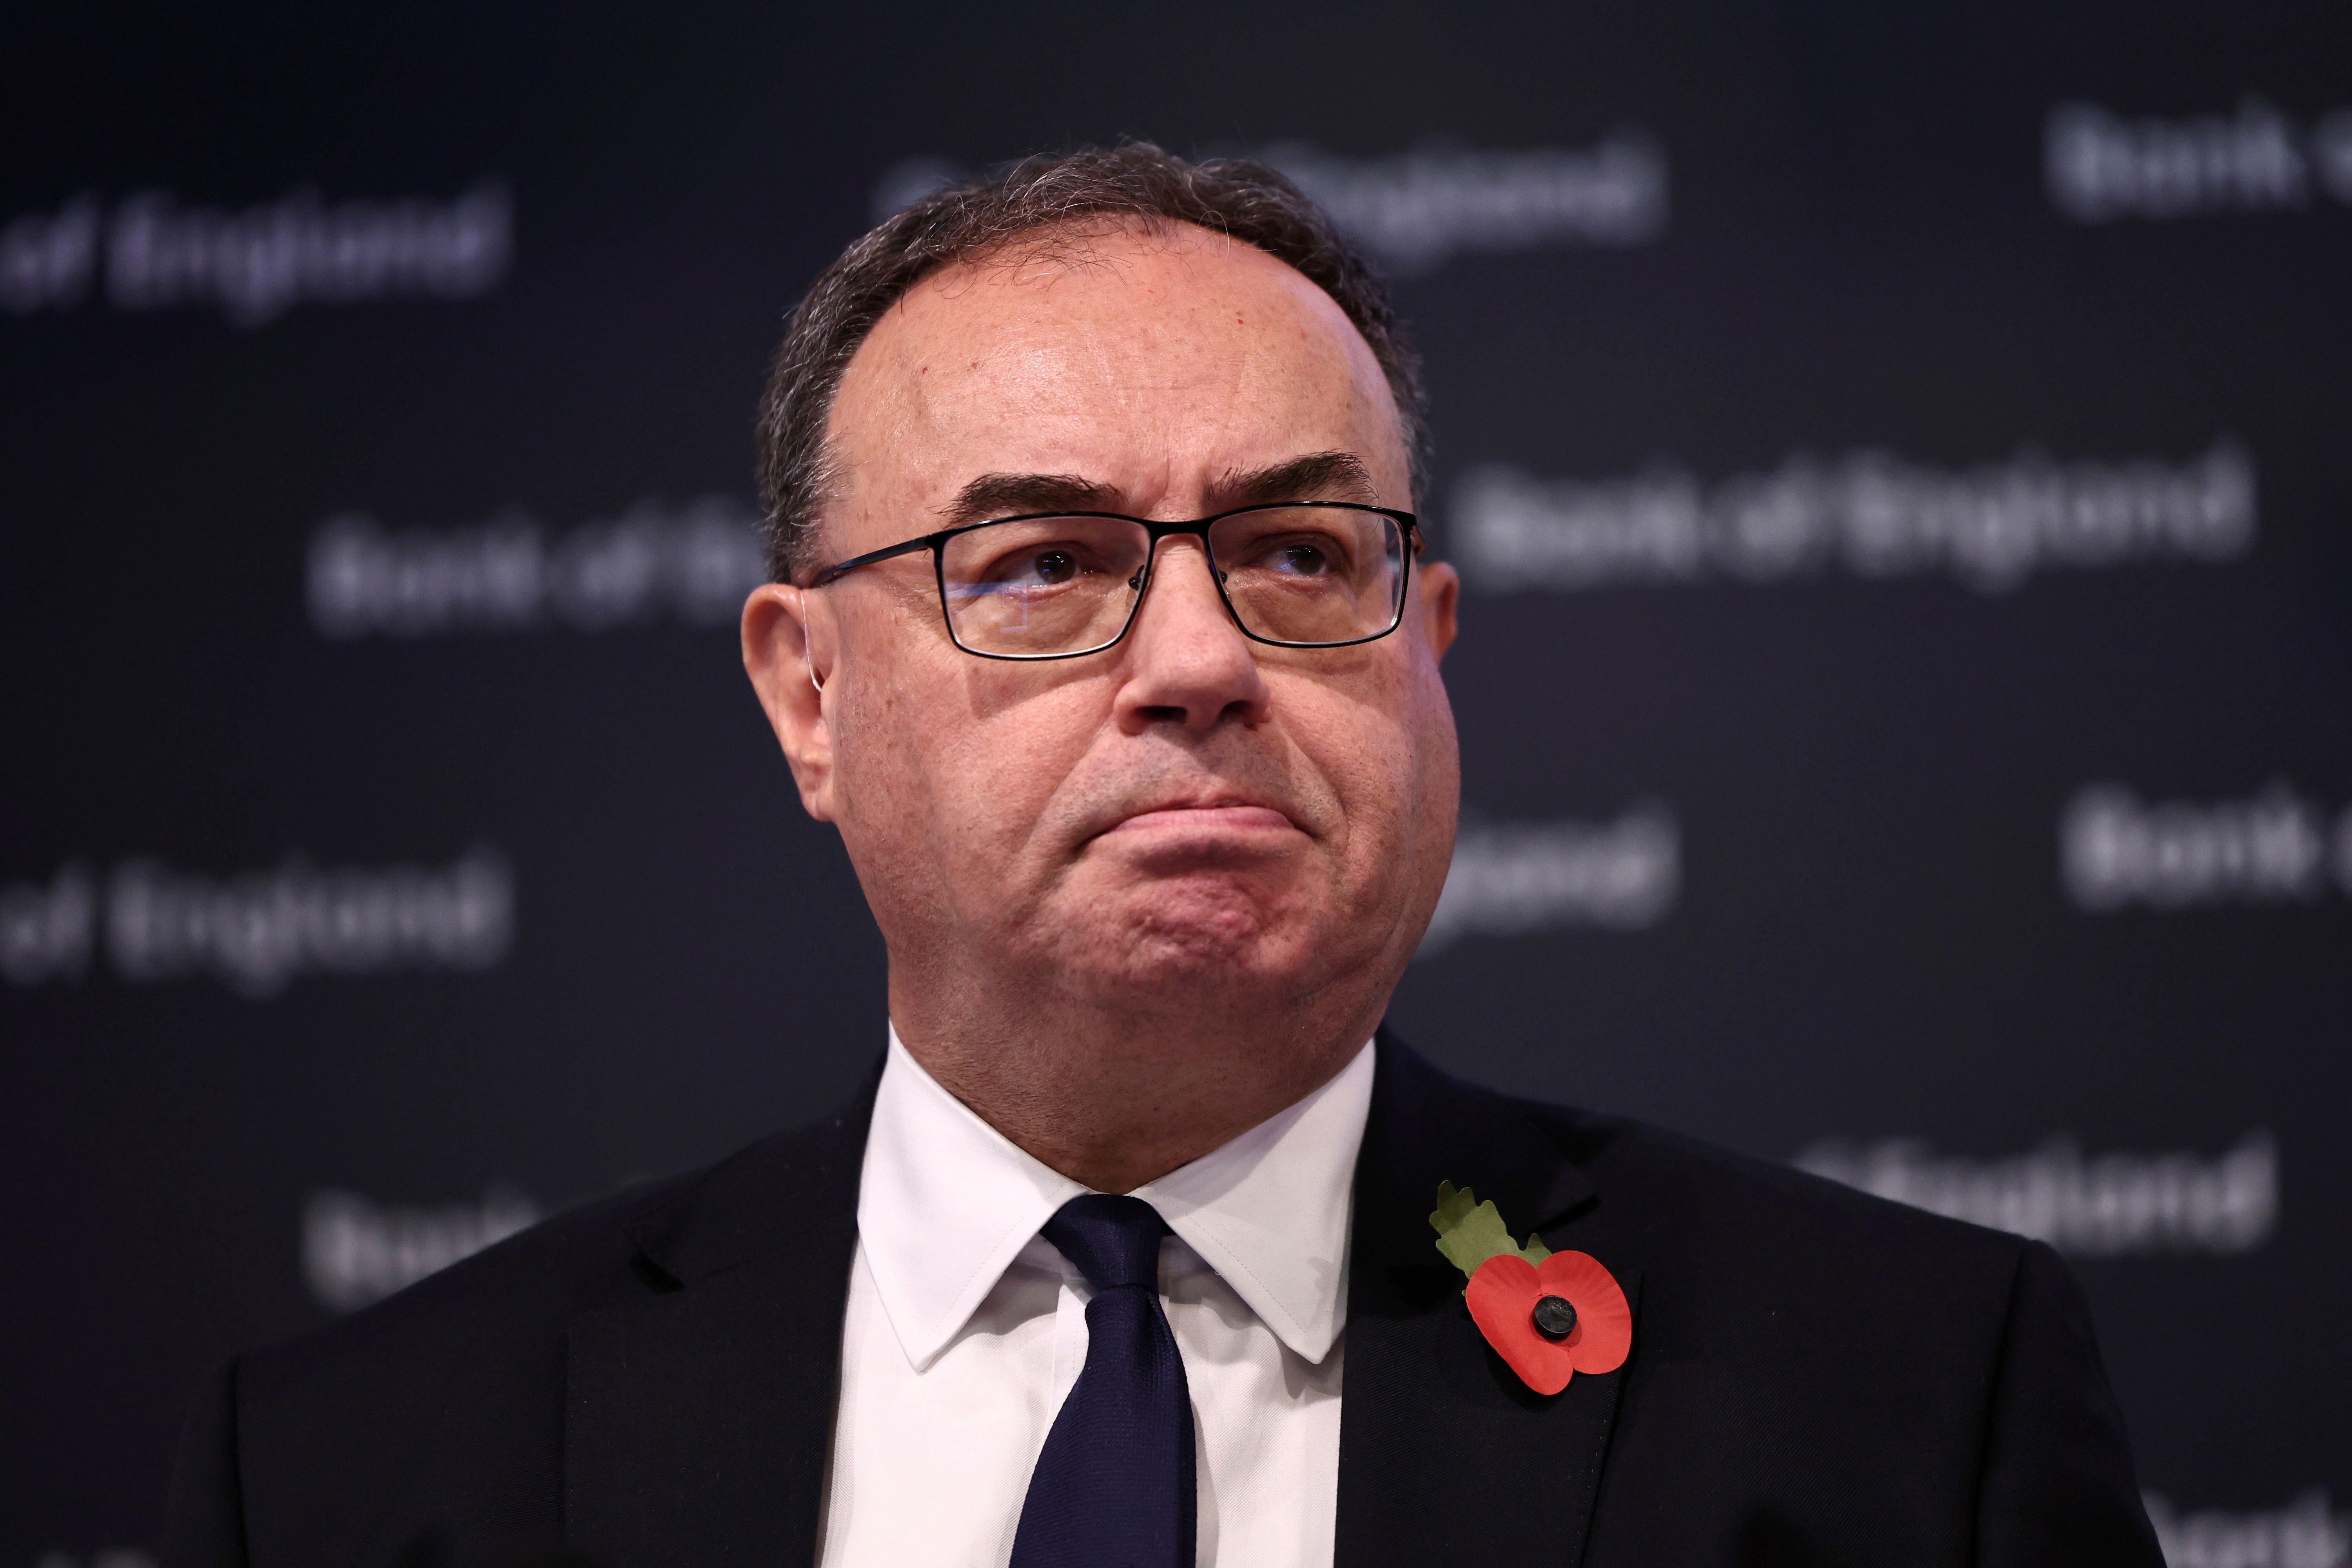 Bank of England governor Andrew Bailey arrives at a press conference to explain the latest decision on rates